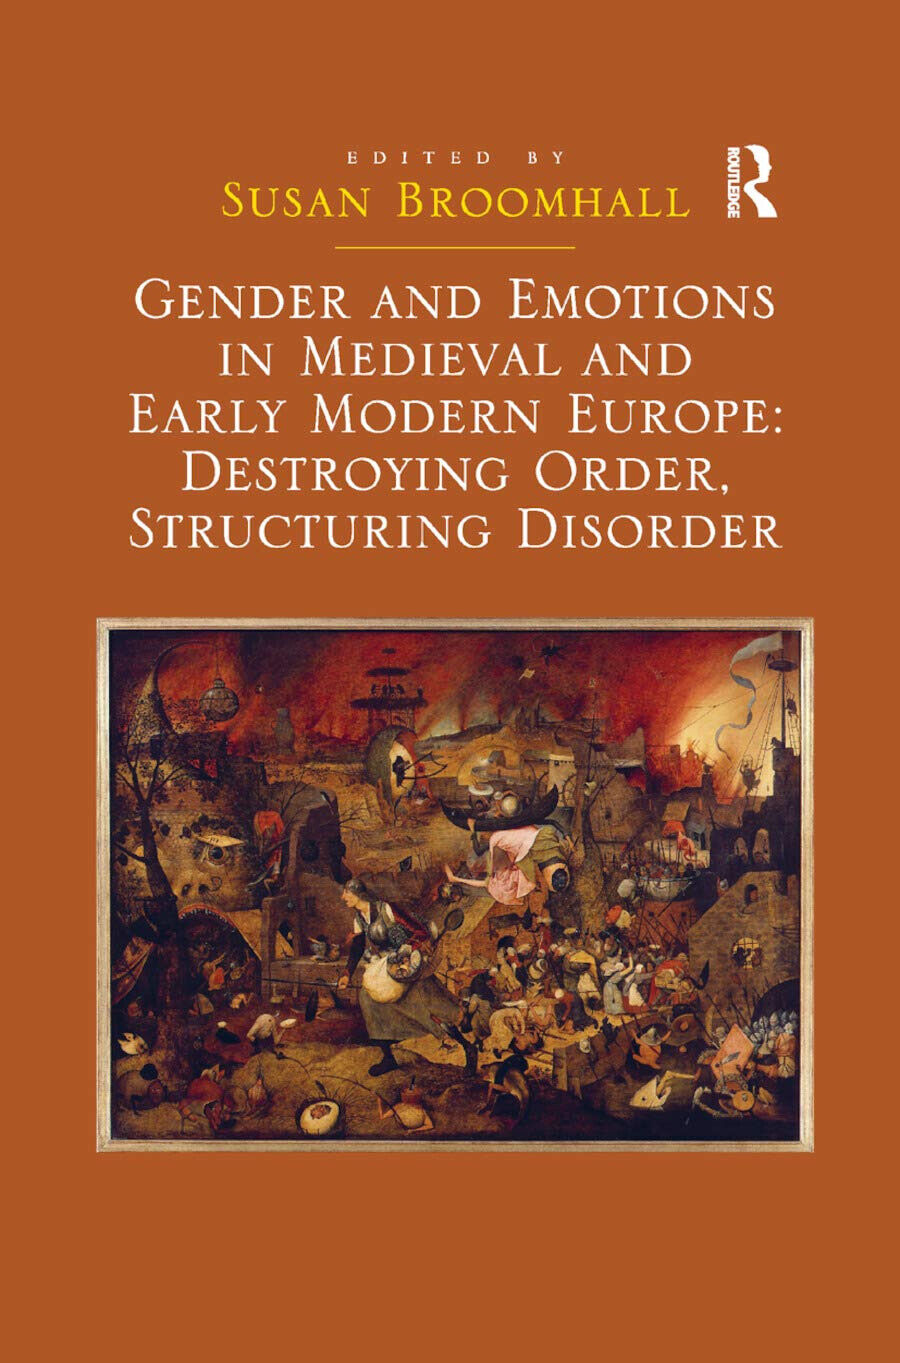 Gender and Emotions in Medieval and Early Modern Europe - Susan Broomhall - 2019